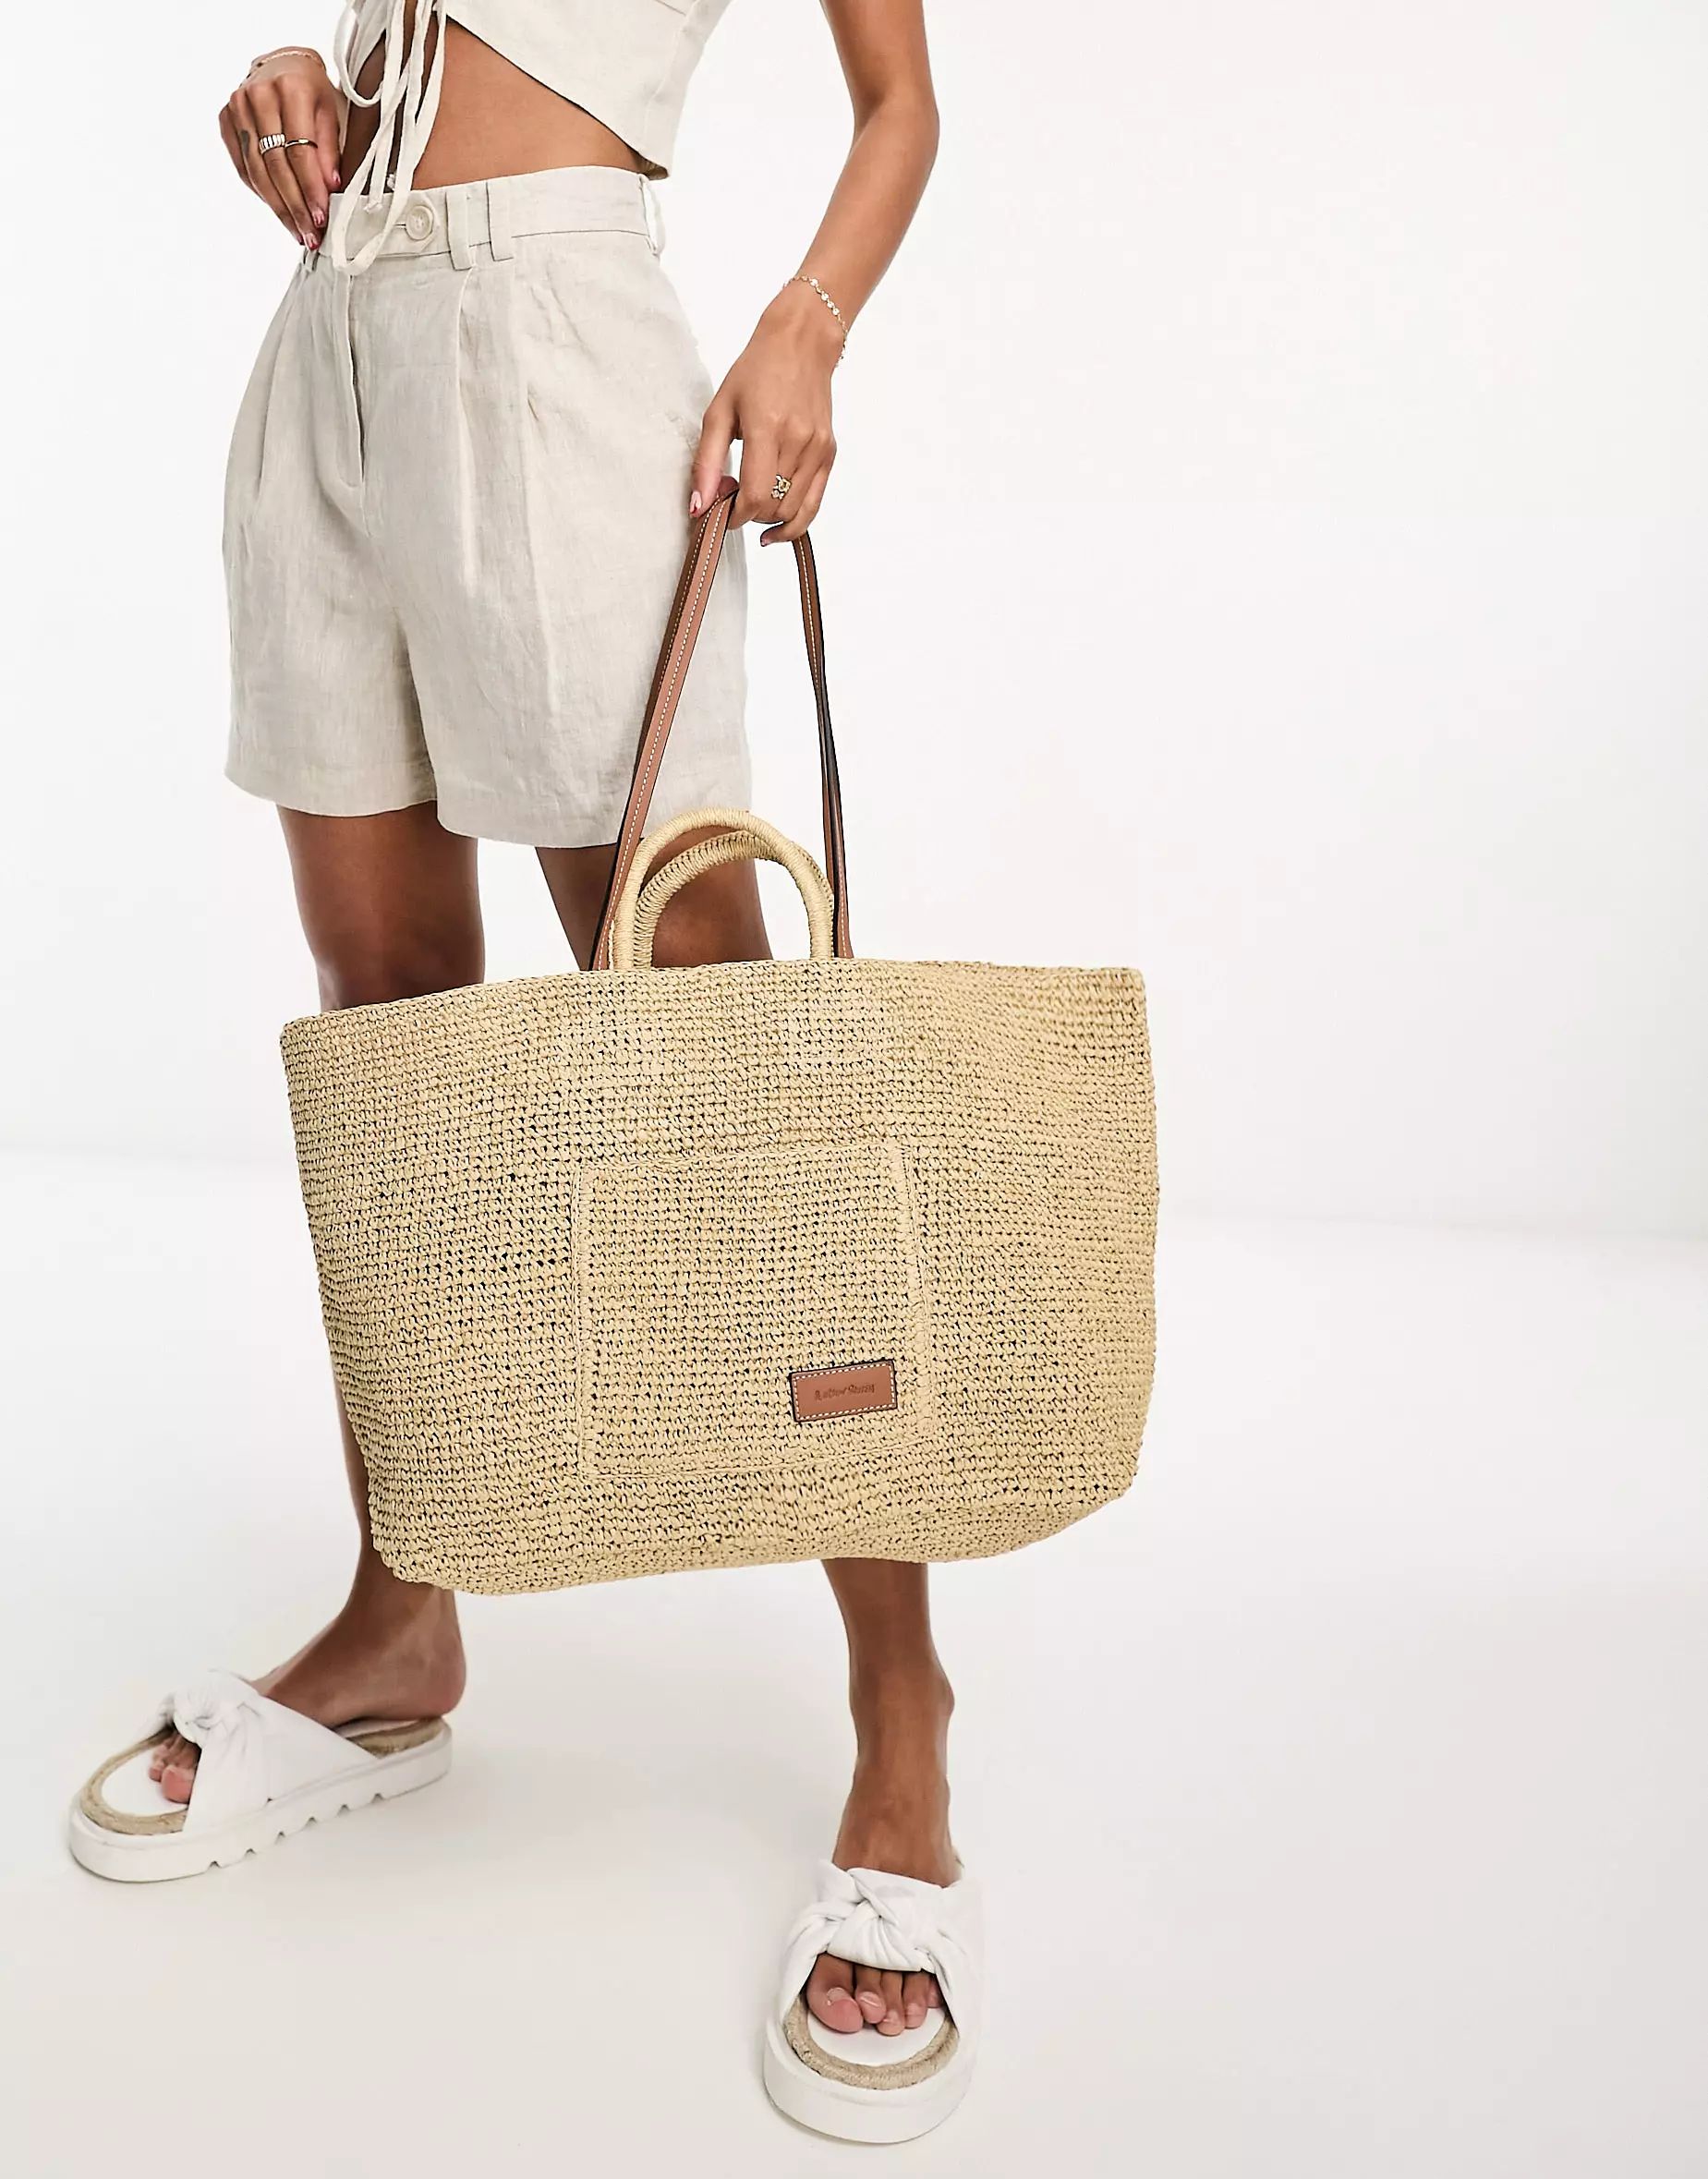 & Other Stories - Borsa shopping in paglia beige | ASOS (Global)